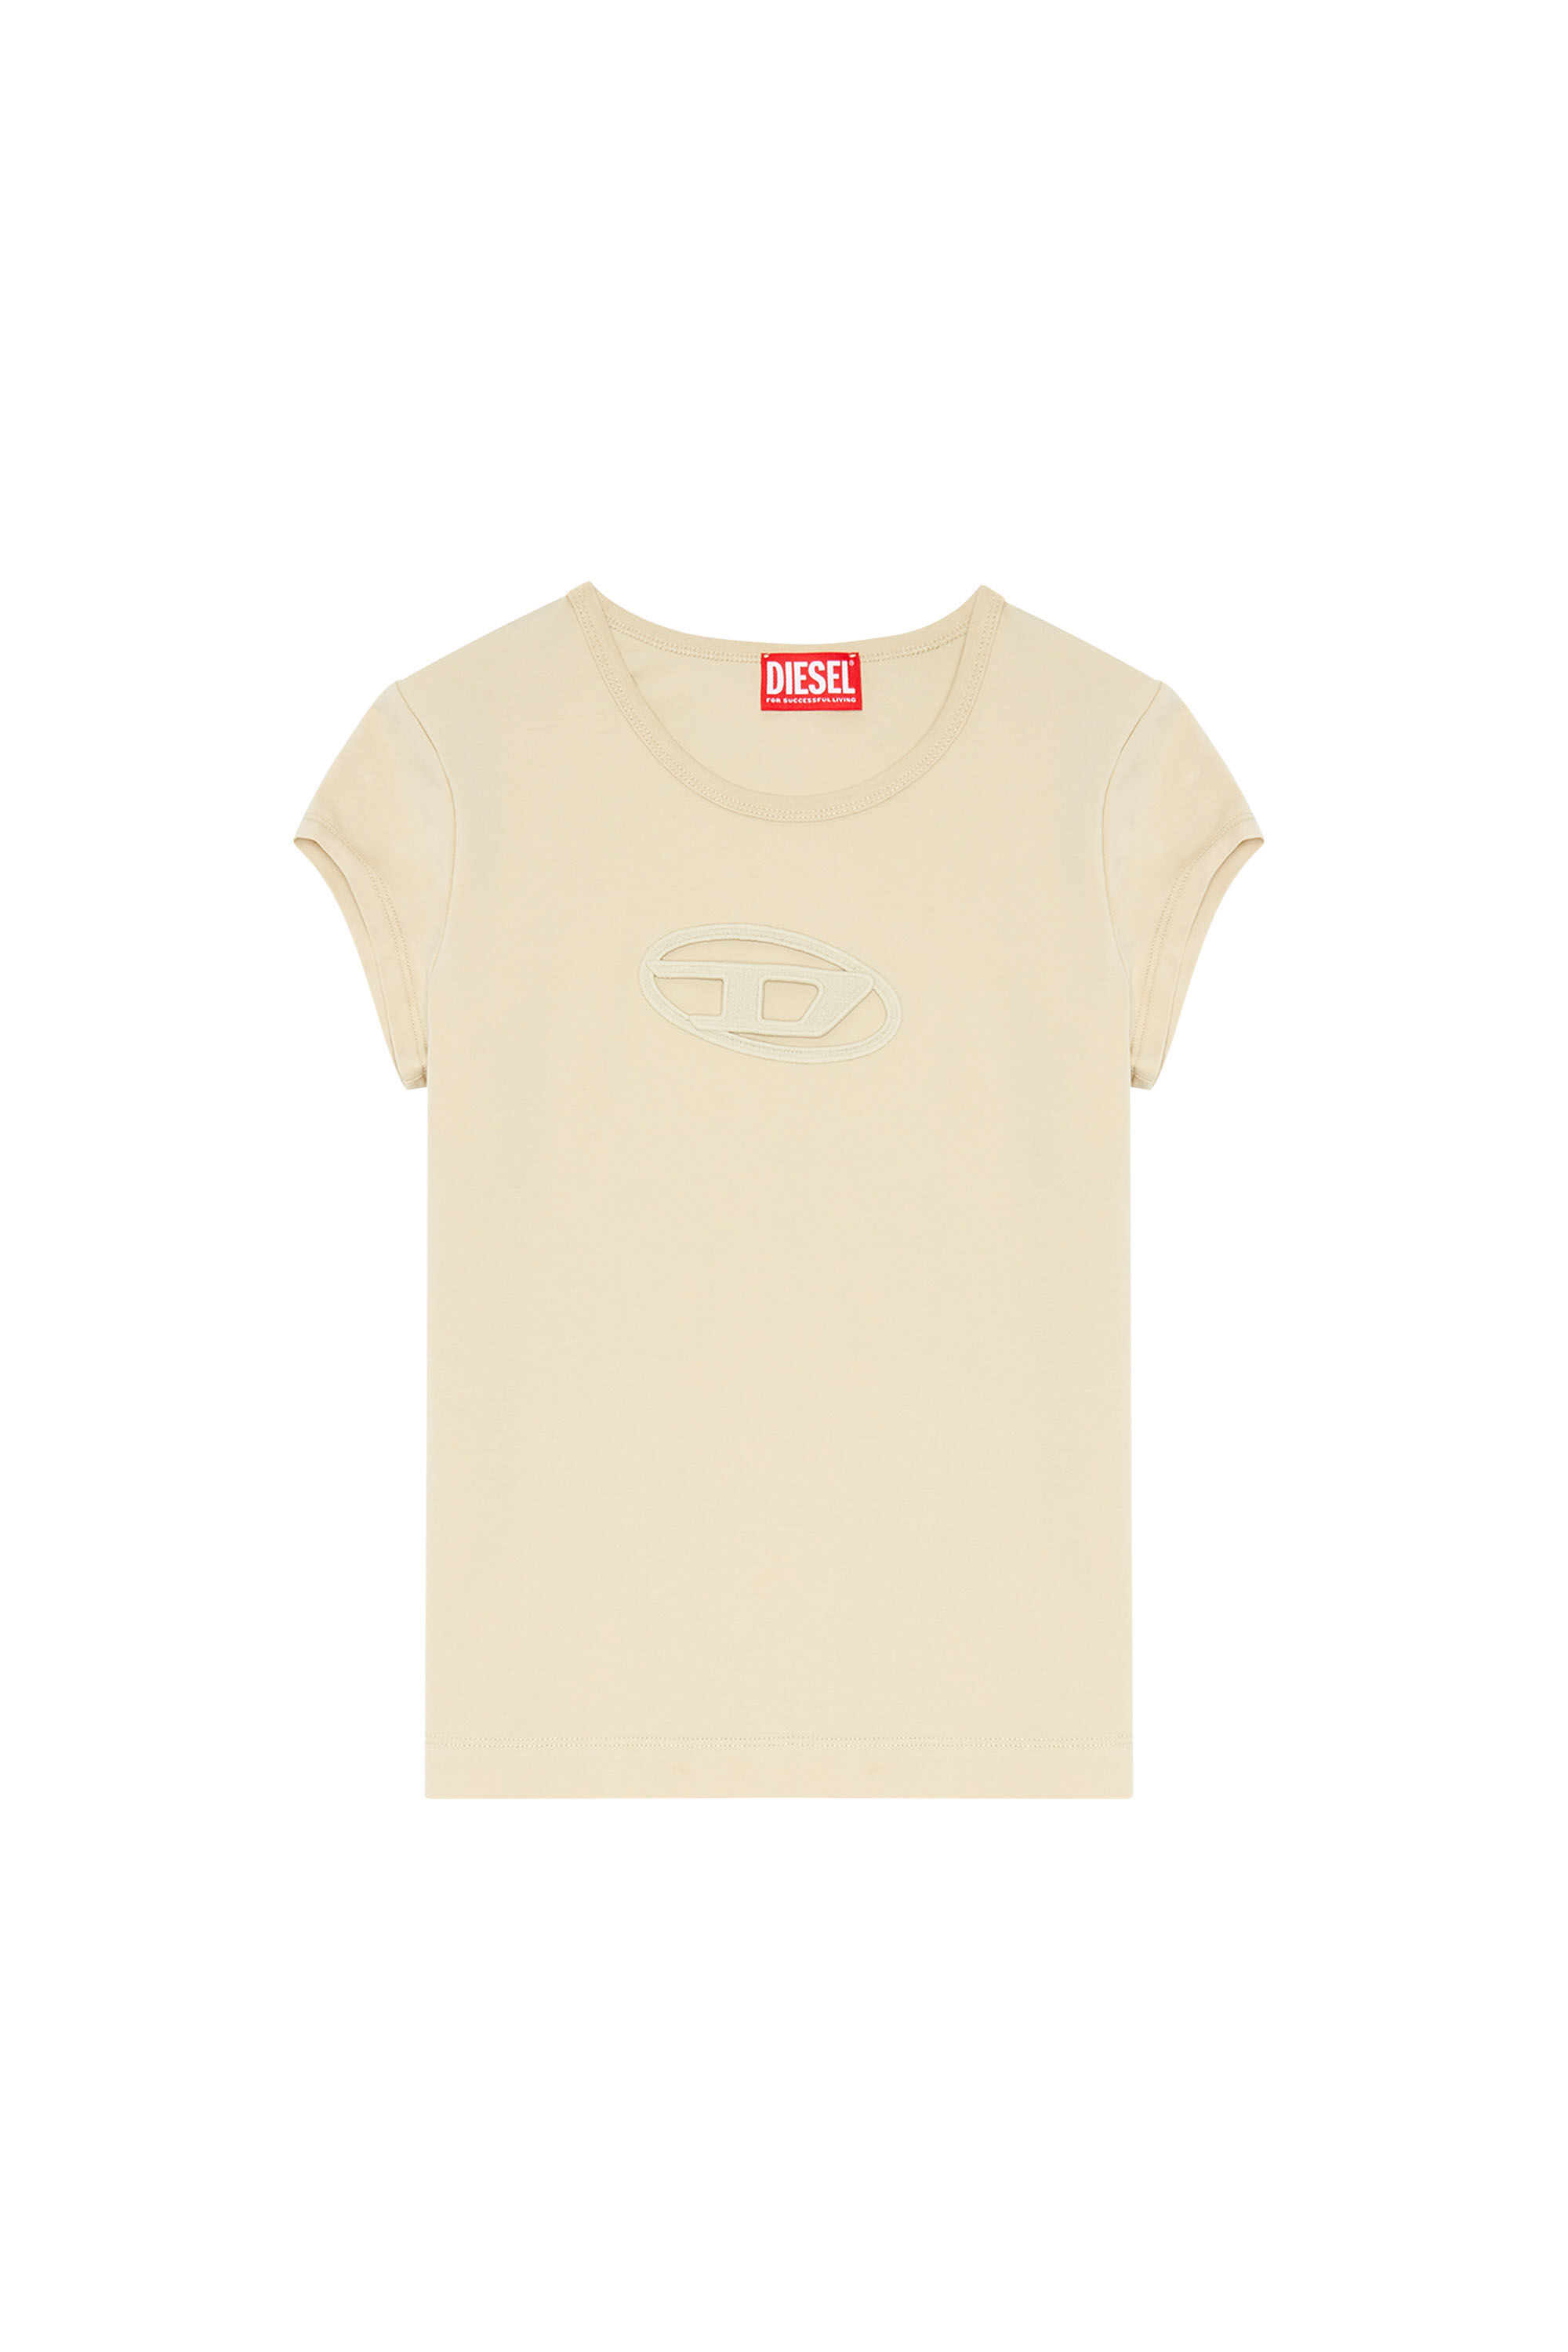 T-ANGIE Woman: Cotton T-shirt with cut-out D logo | Diesel